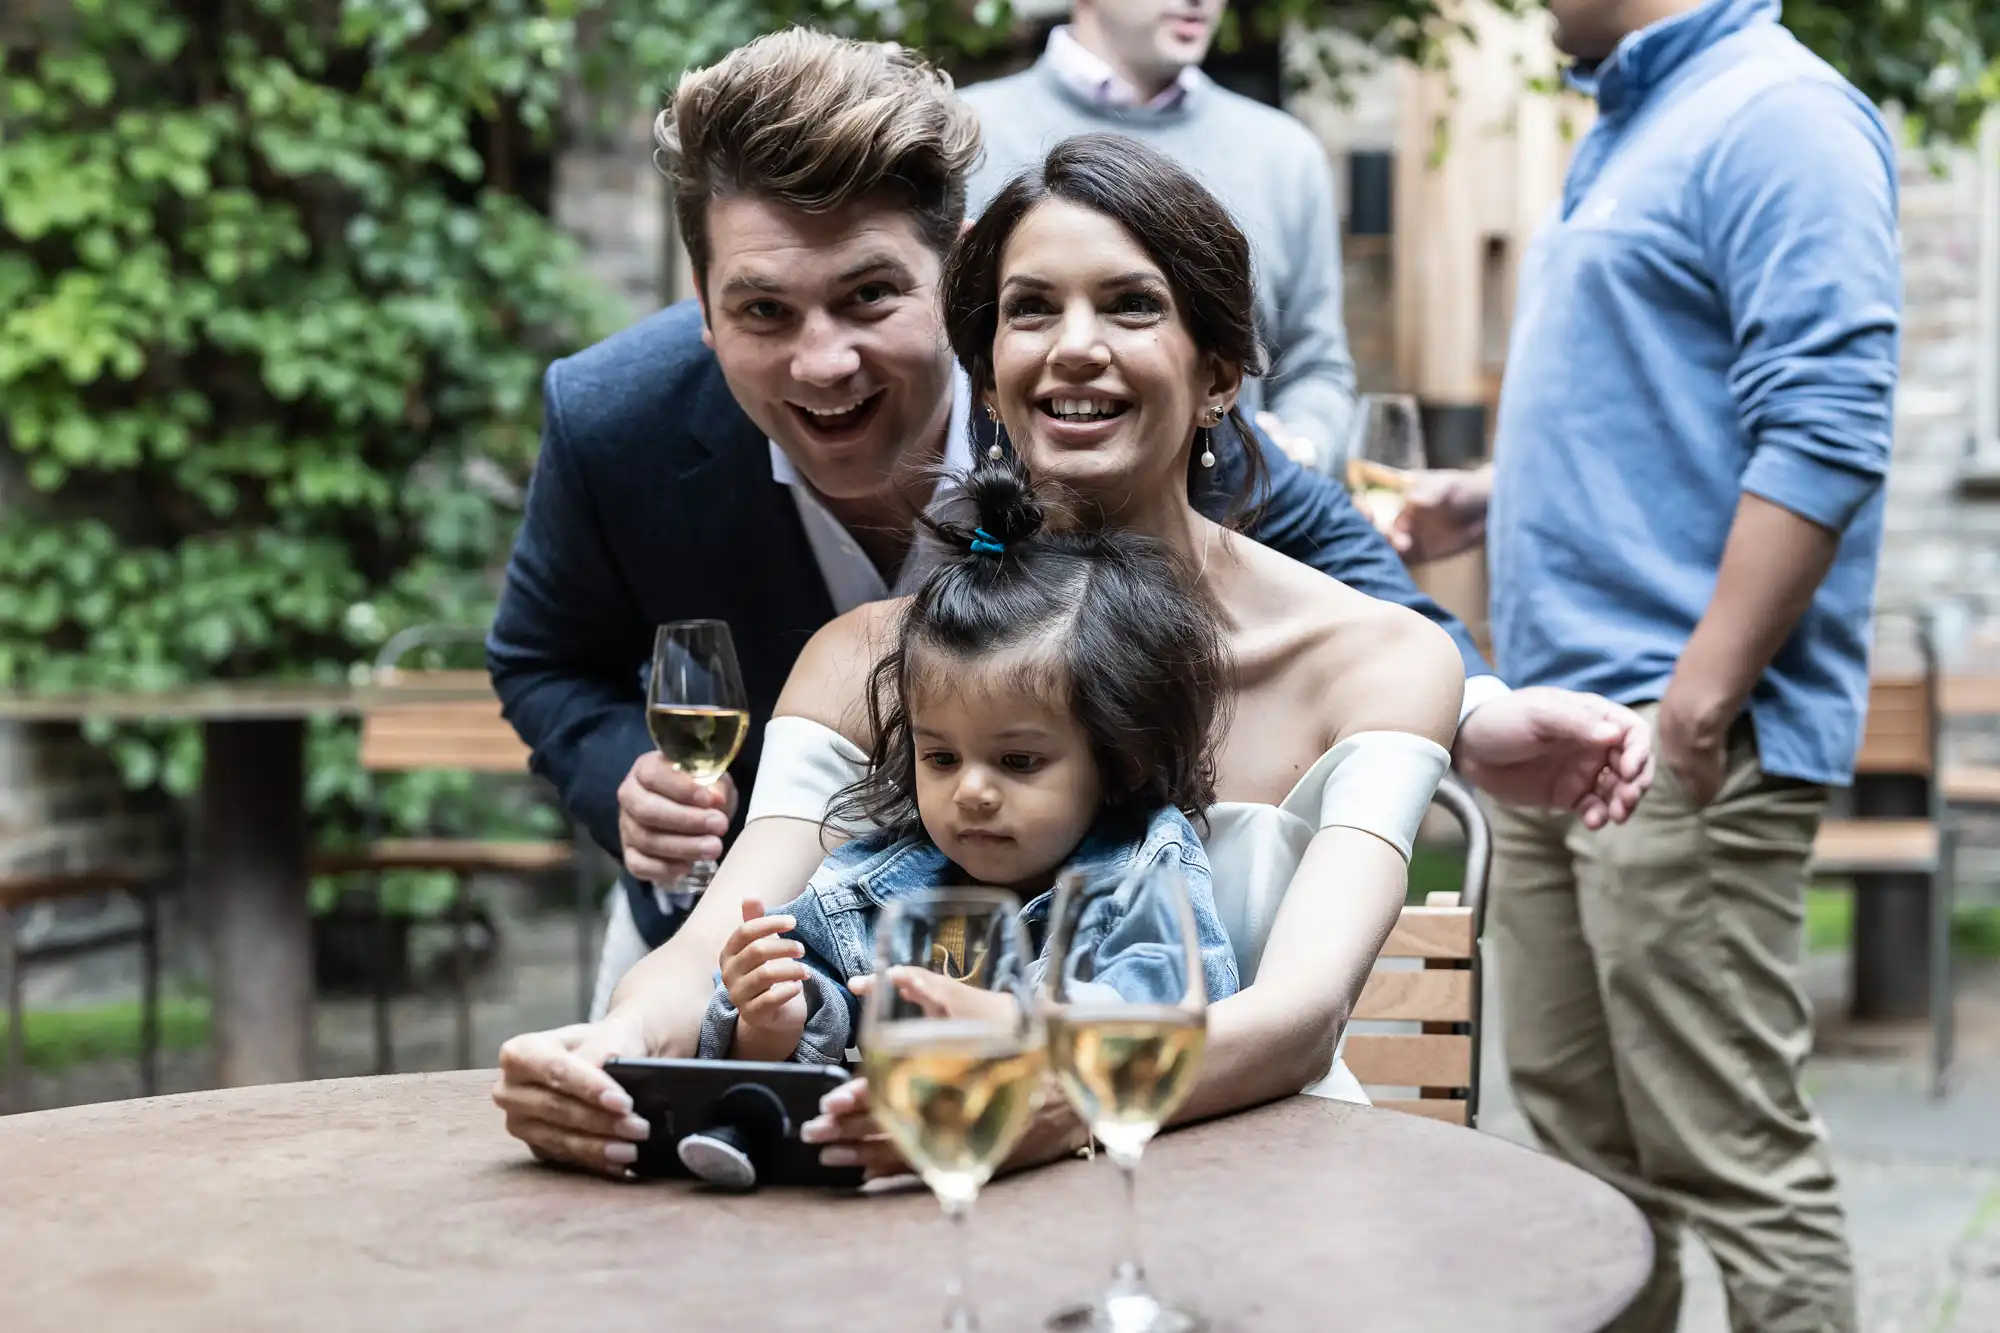 Happy couple with a young child sitting at a table at an outdoor gathering, holding glasses of wine and smiling.